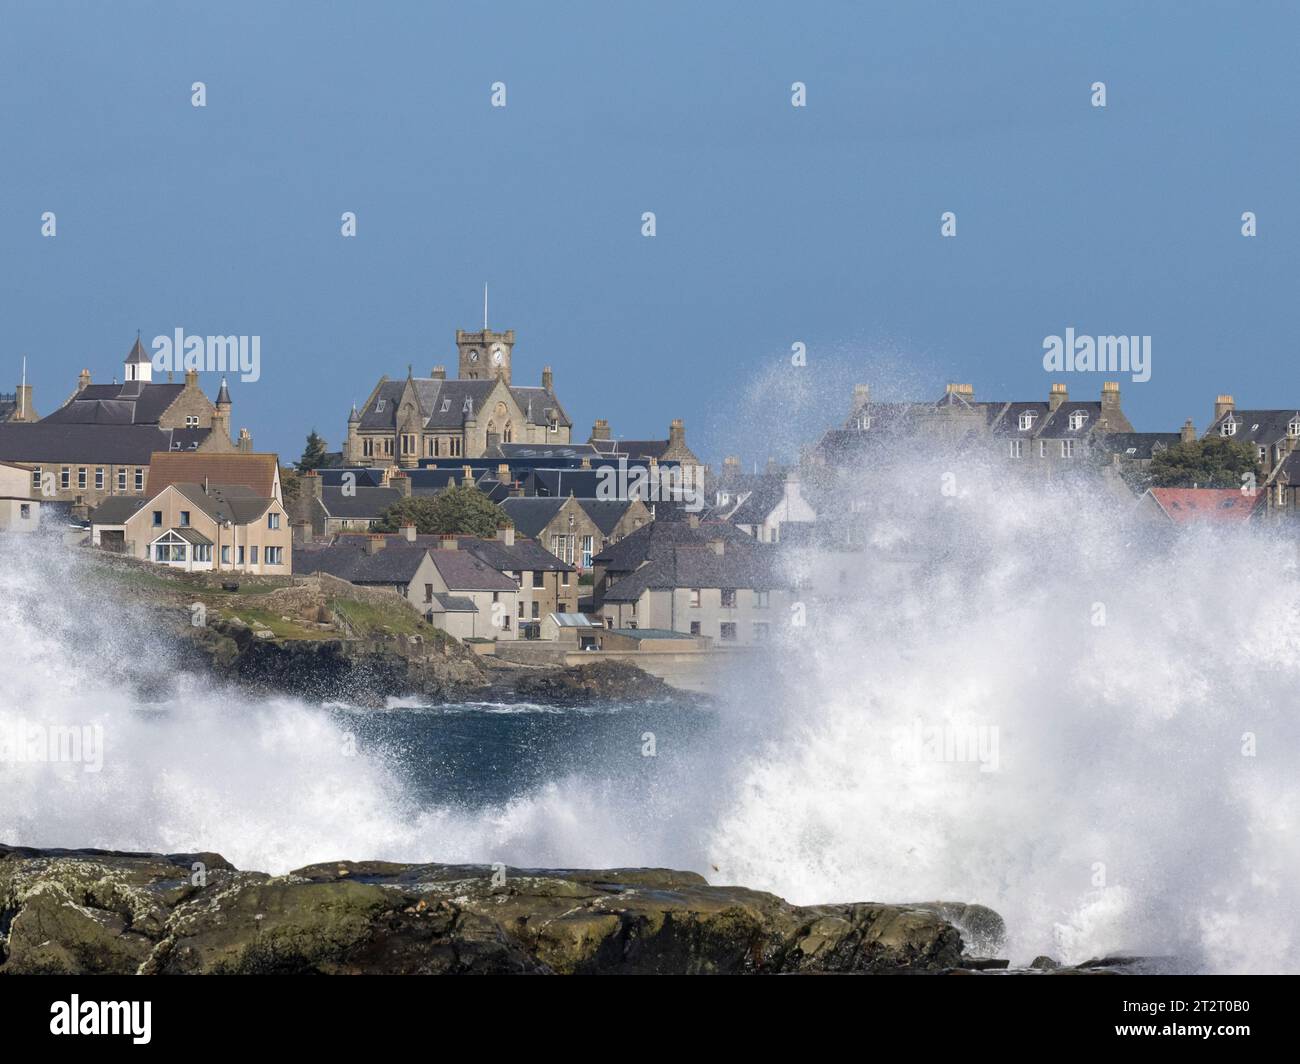 View of Lerwick, with Lerwick Town Hall at Hill Head, and crashing waves in Brei Wick, looking north from Seafield, Mainland Shetland, Scotland Stock Photo